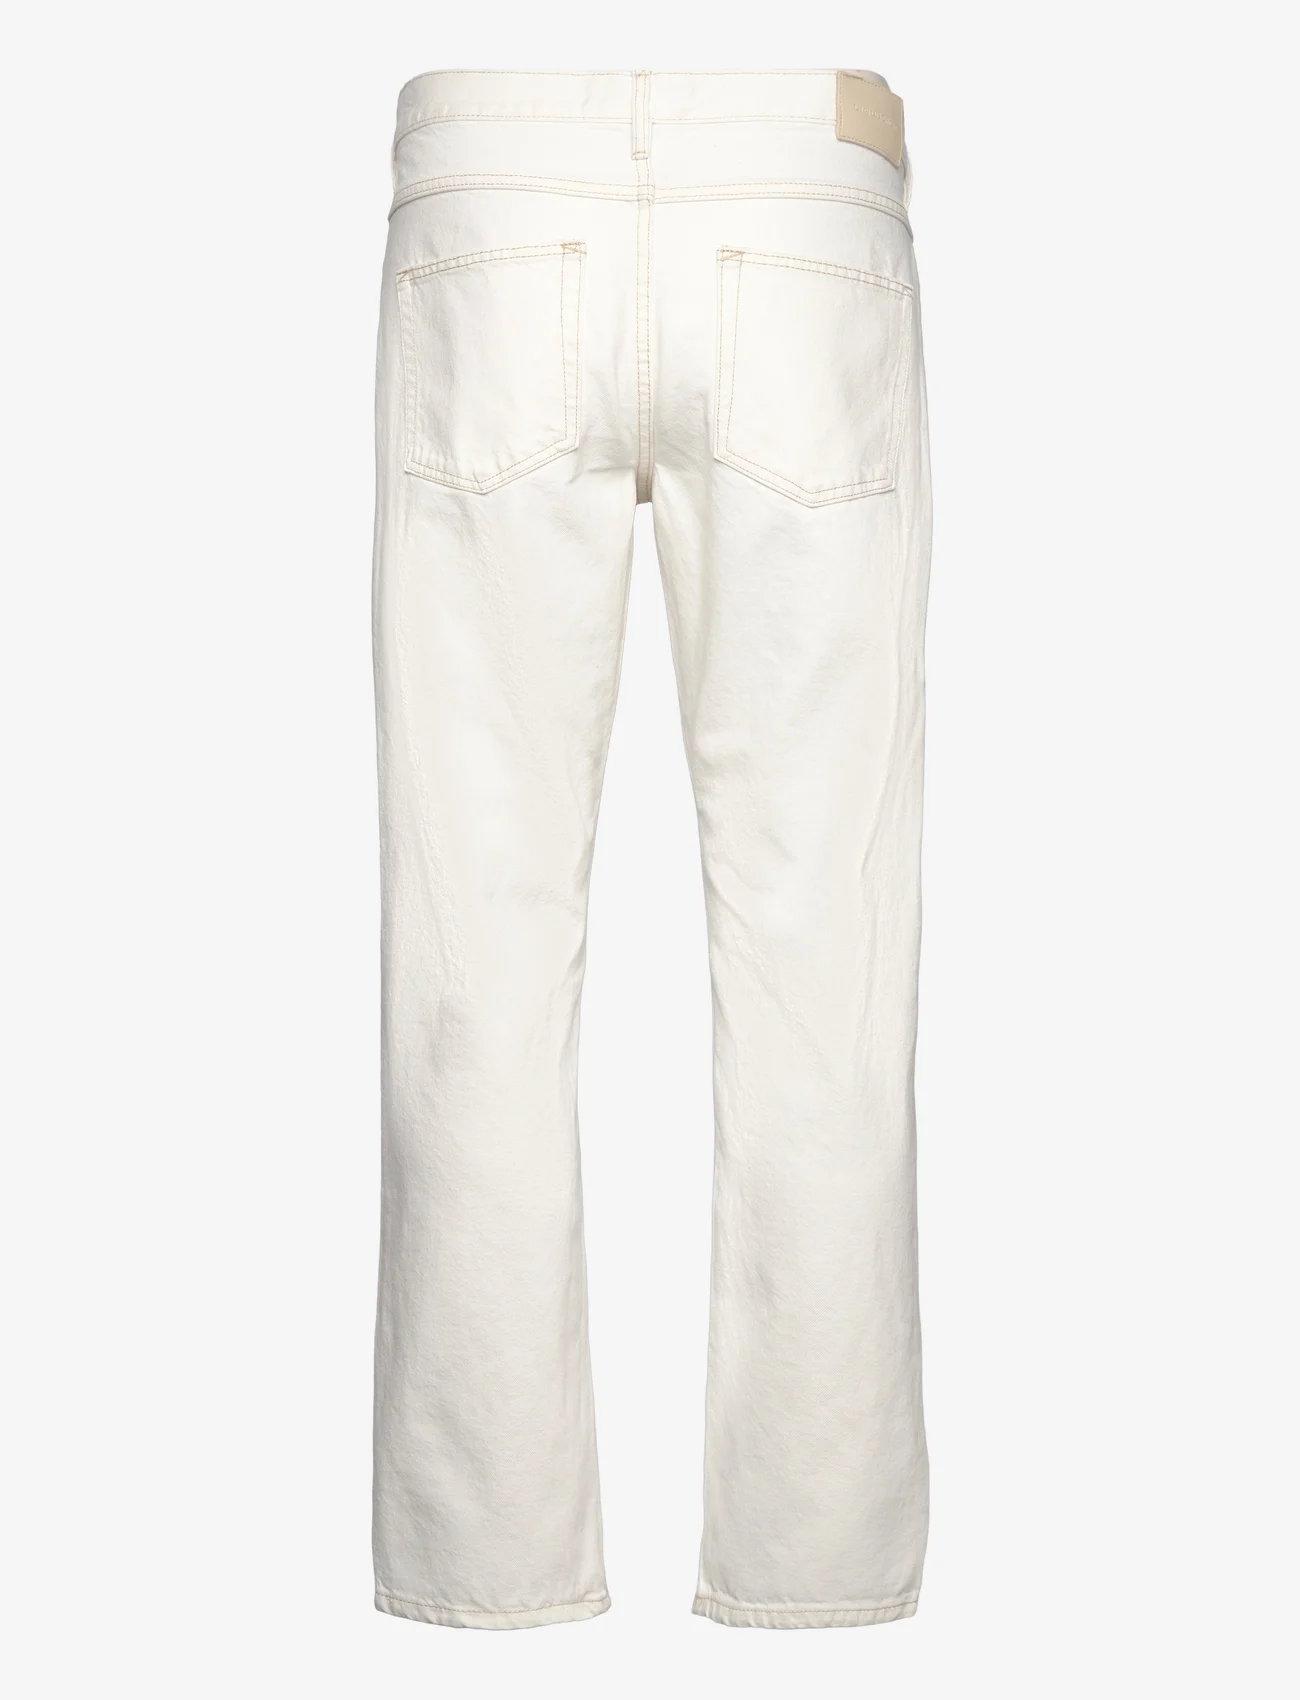 Lindbergh - Loose fit jeans - nordic style - off white - 1